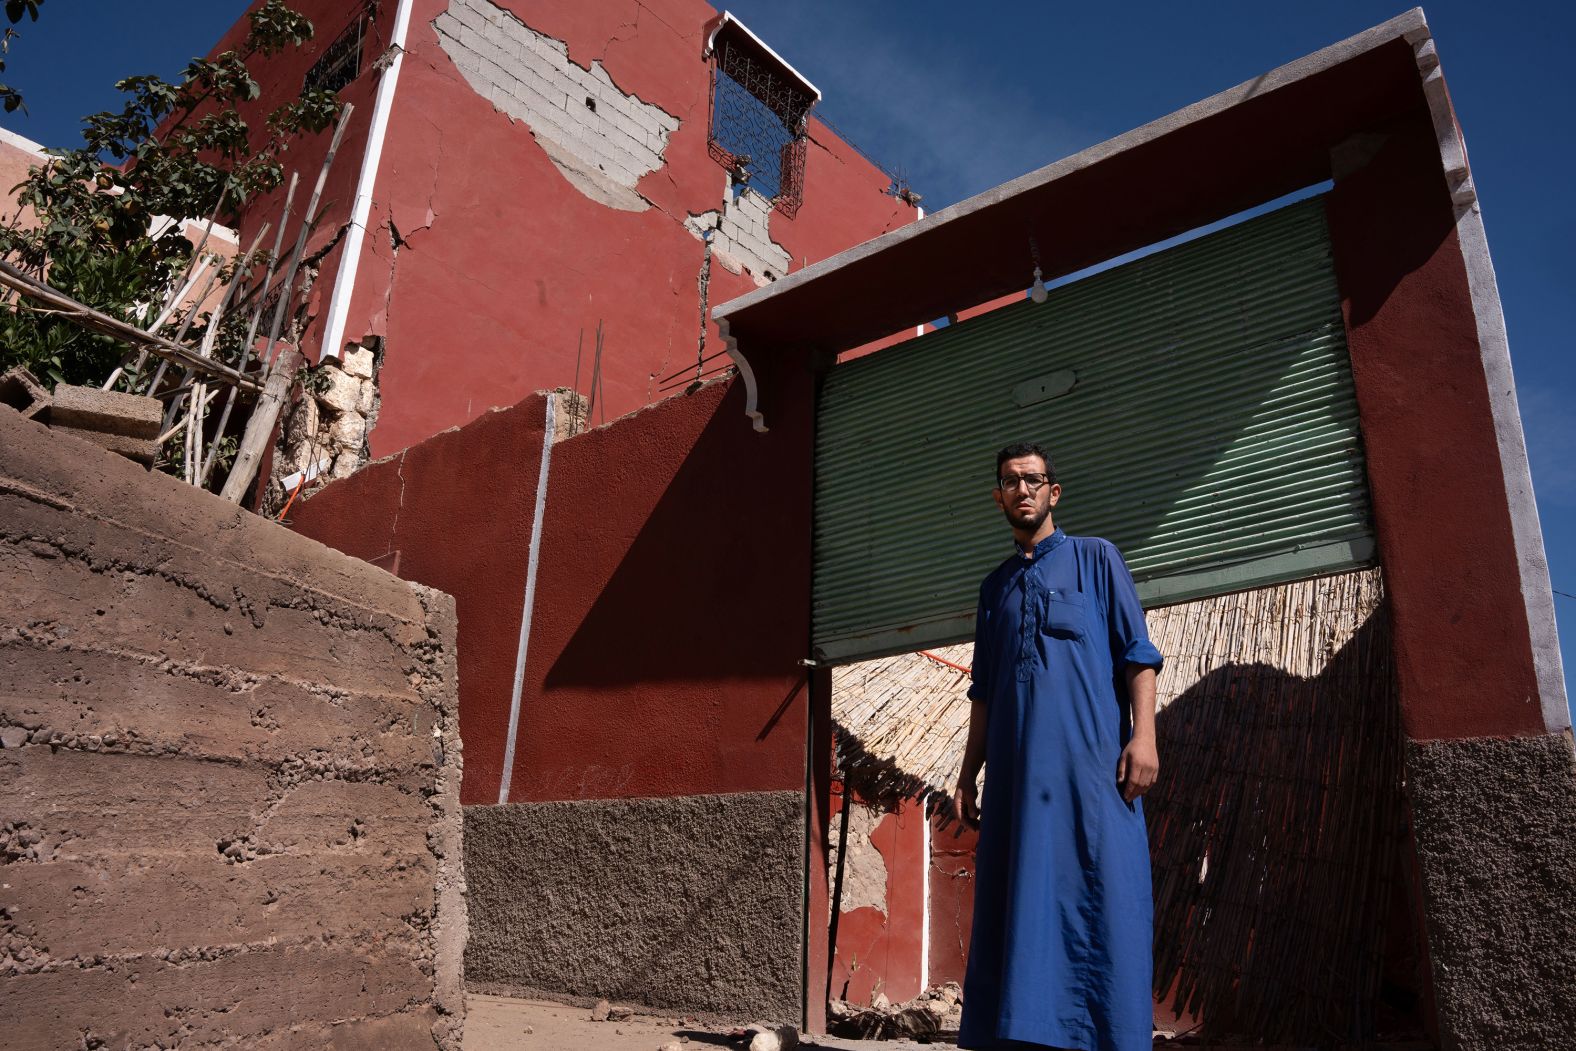 Yassine Nomghar poses in front of his destroyed house in Moulay Brahim. "My father built this house in the 1980s, and little by little we all added more parts with a lot of effort," he said. "Now we don't have anything."